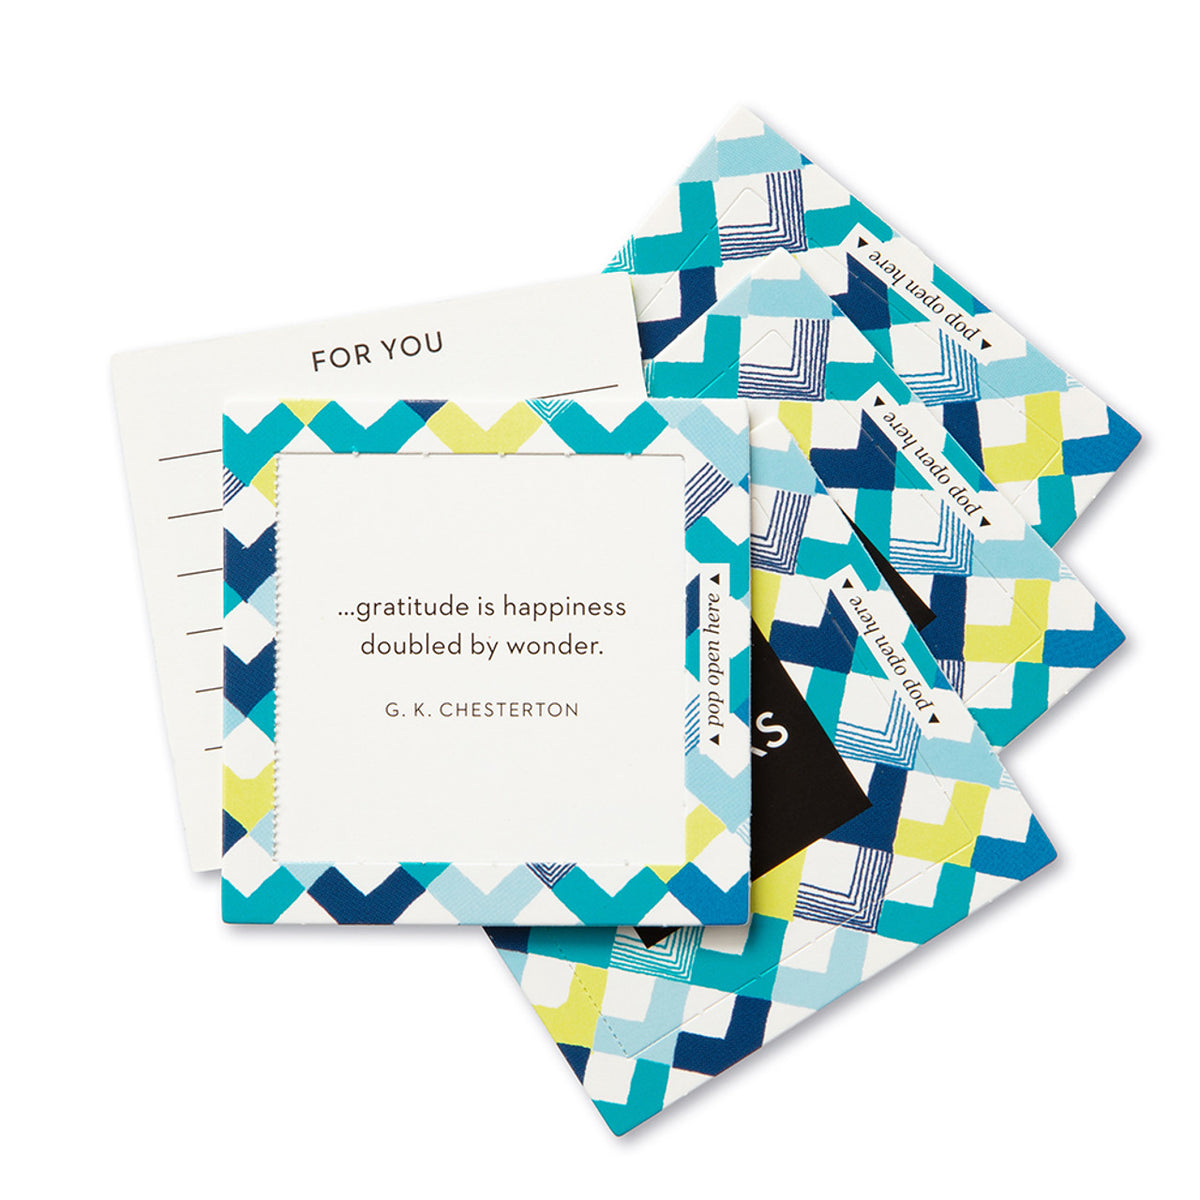 Sample card - "Gratitude is happiness doubled by wonder."